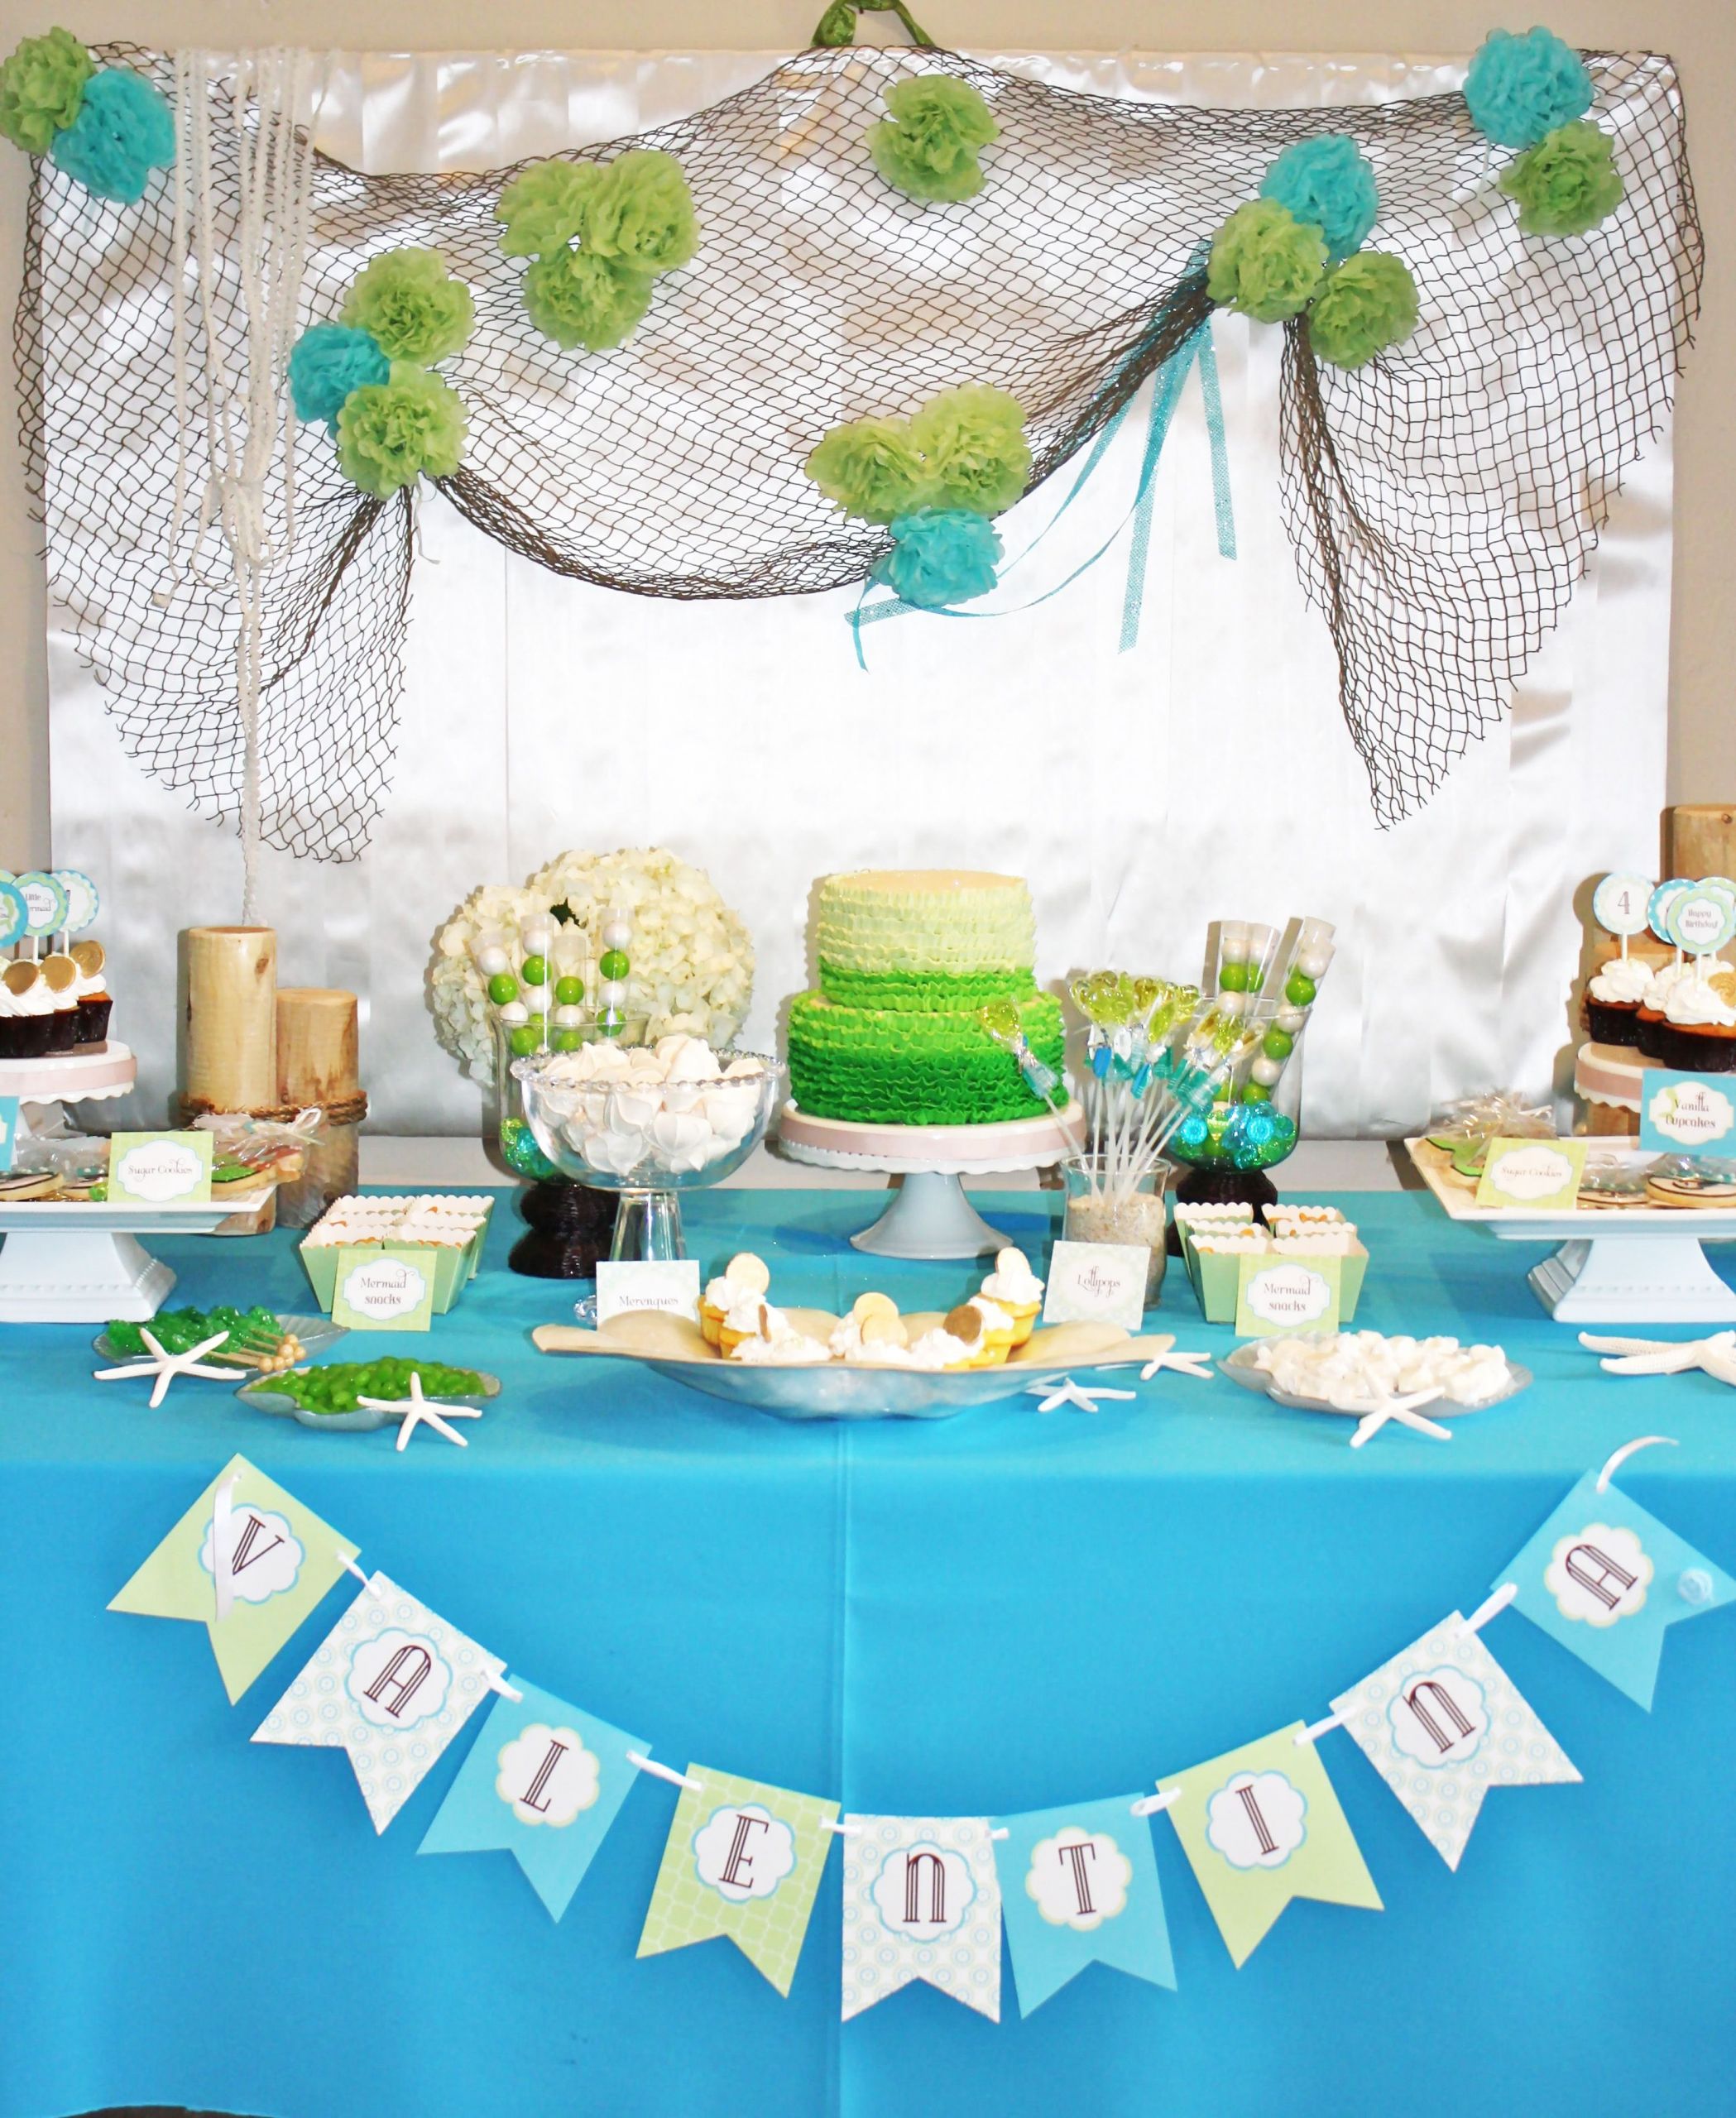 Pirate And Mermaid Party Ideas
 mermaid pirate party